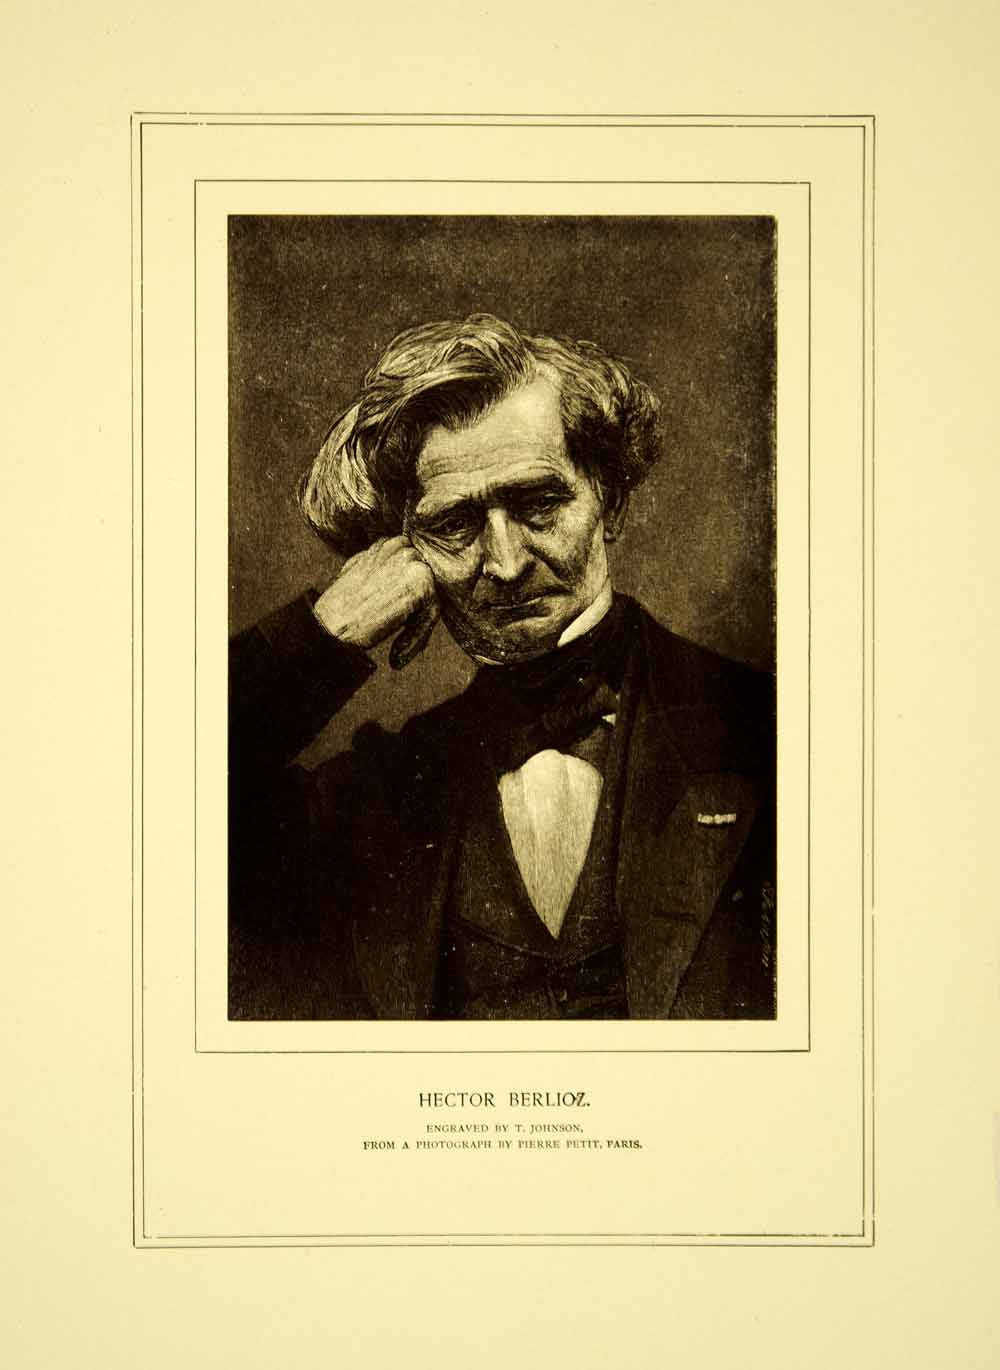 1918 Wood Engraving Hector Berlioz Portrait French Romantic Music Composer XME6